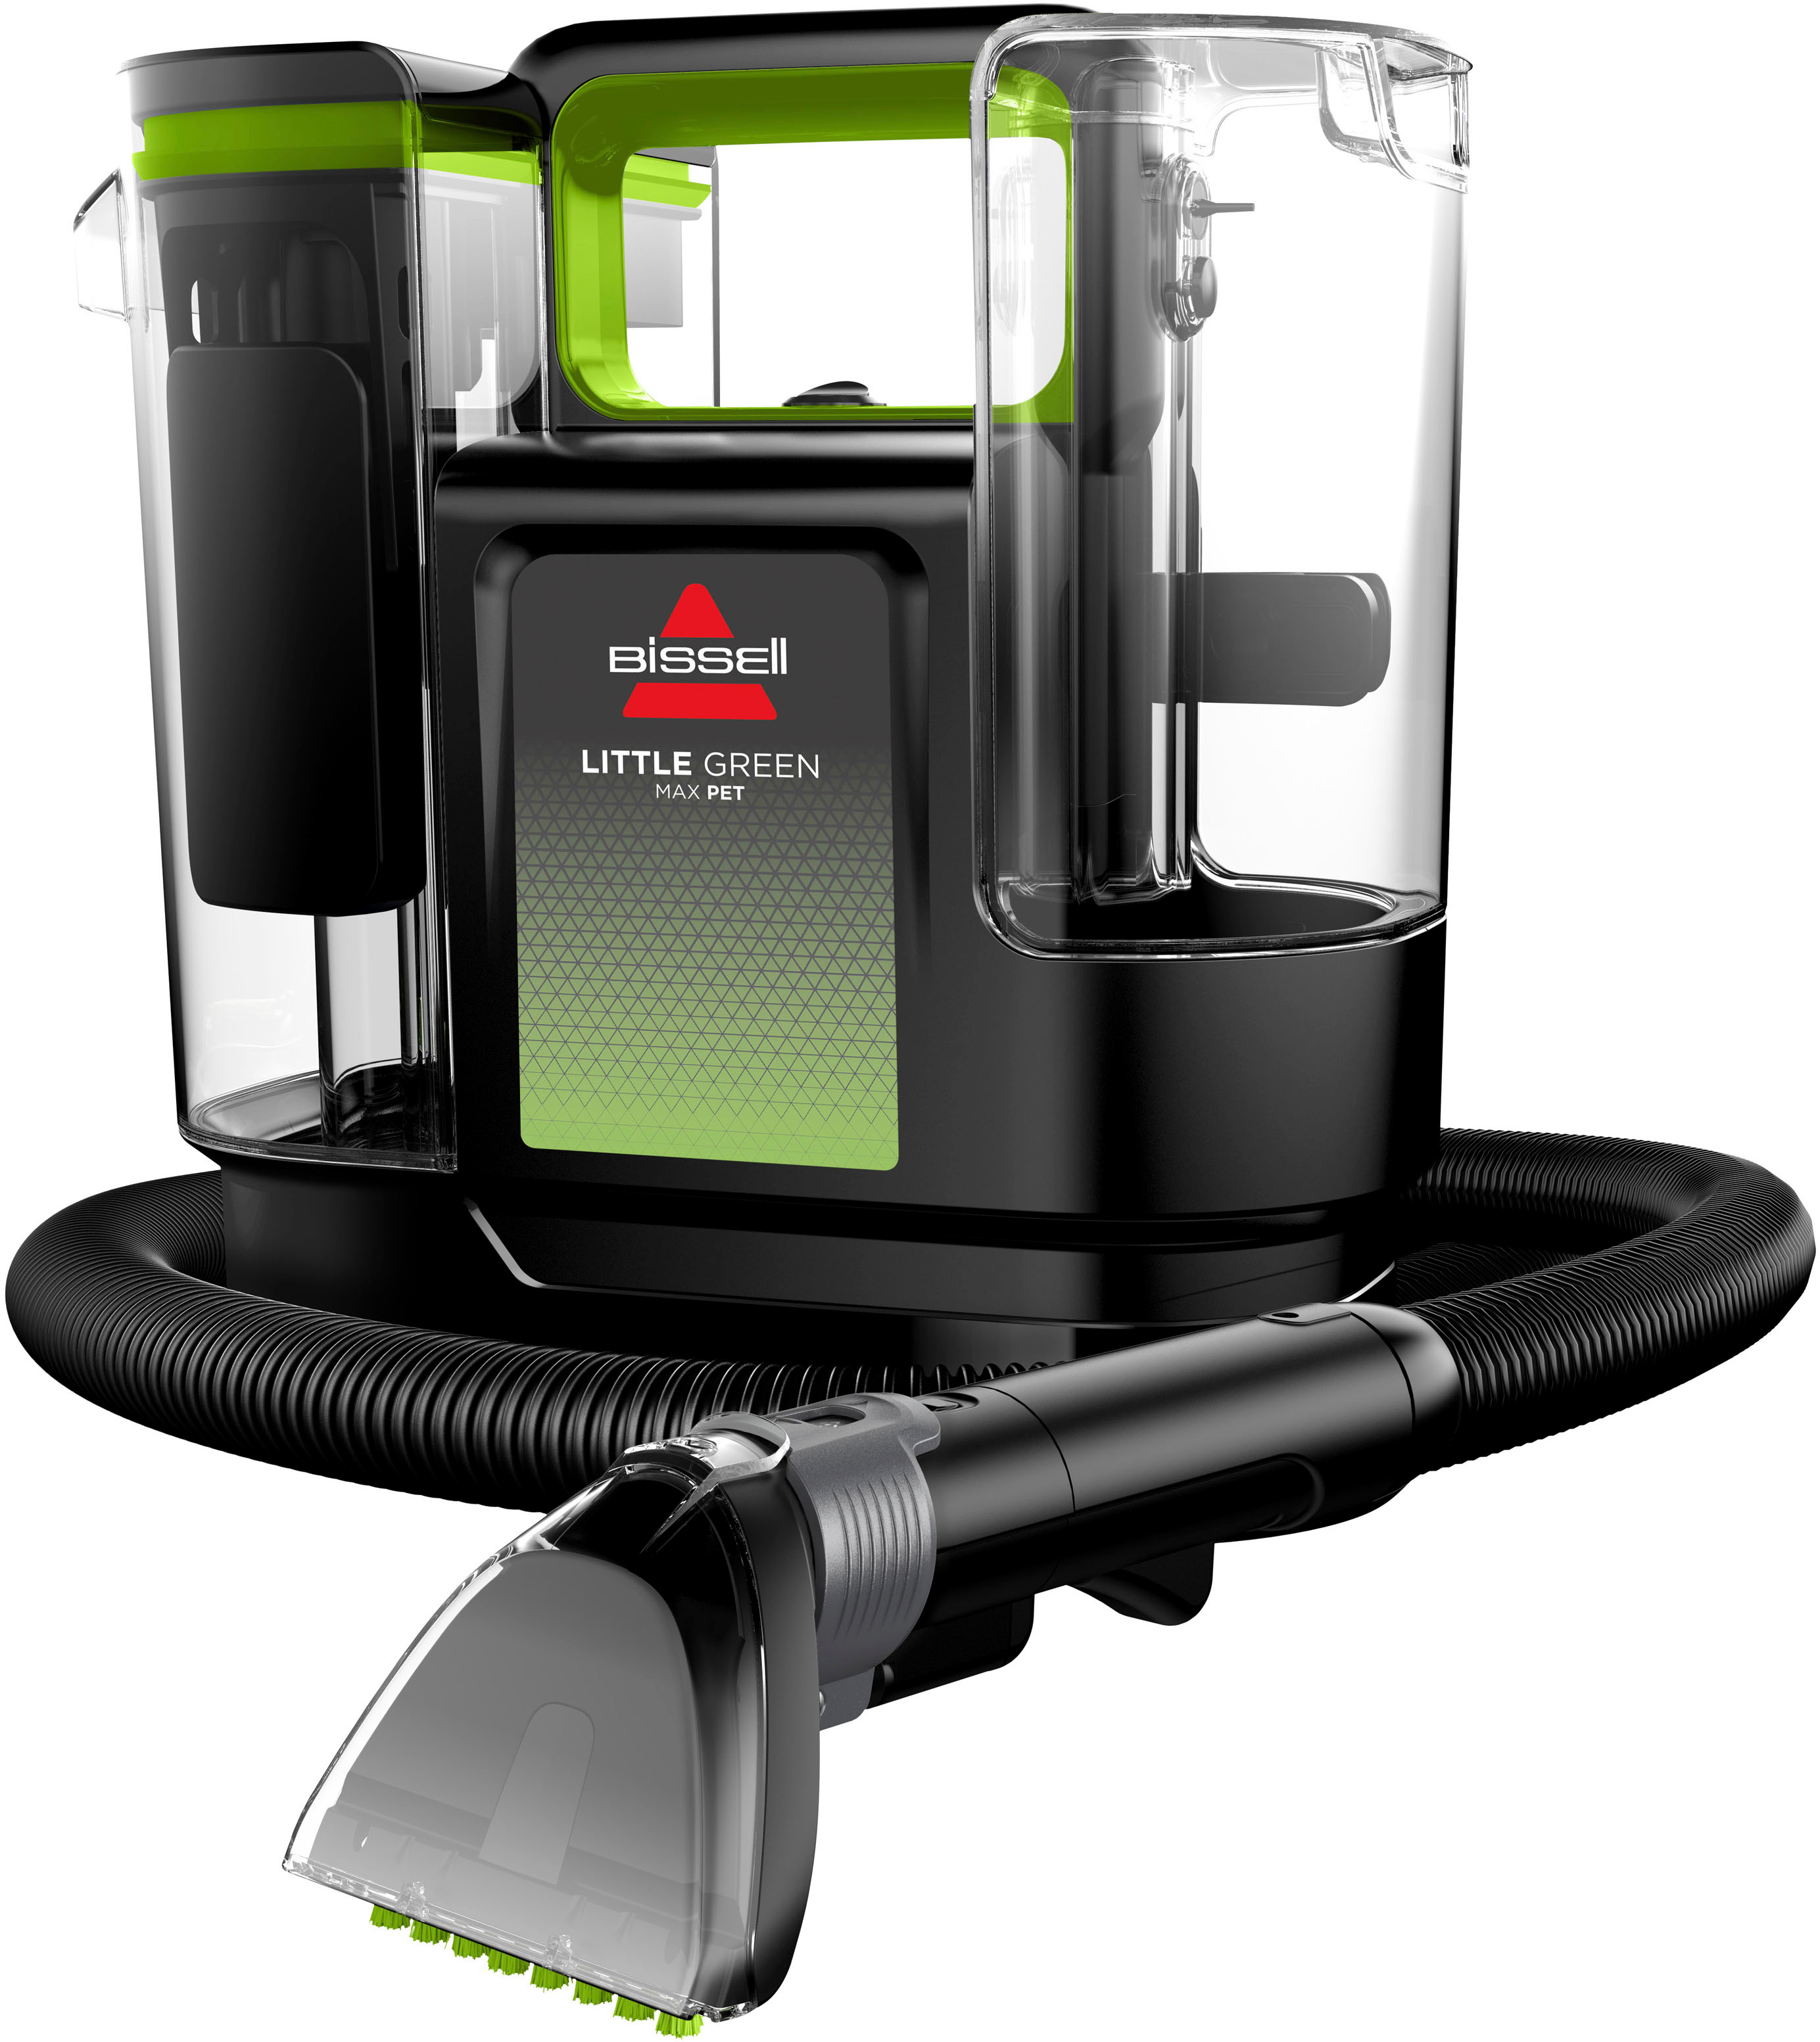 Left View: Bissell Little Green Max Pet Handheld Deep Cleaner - Black with Cha Cha Lime Accents